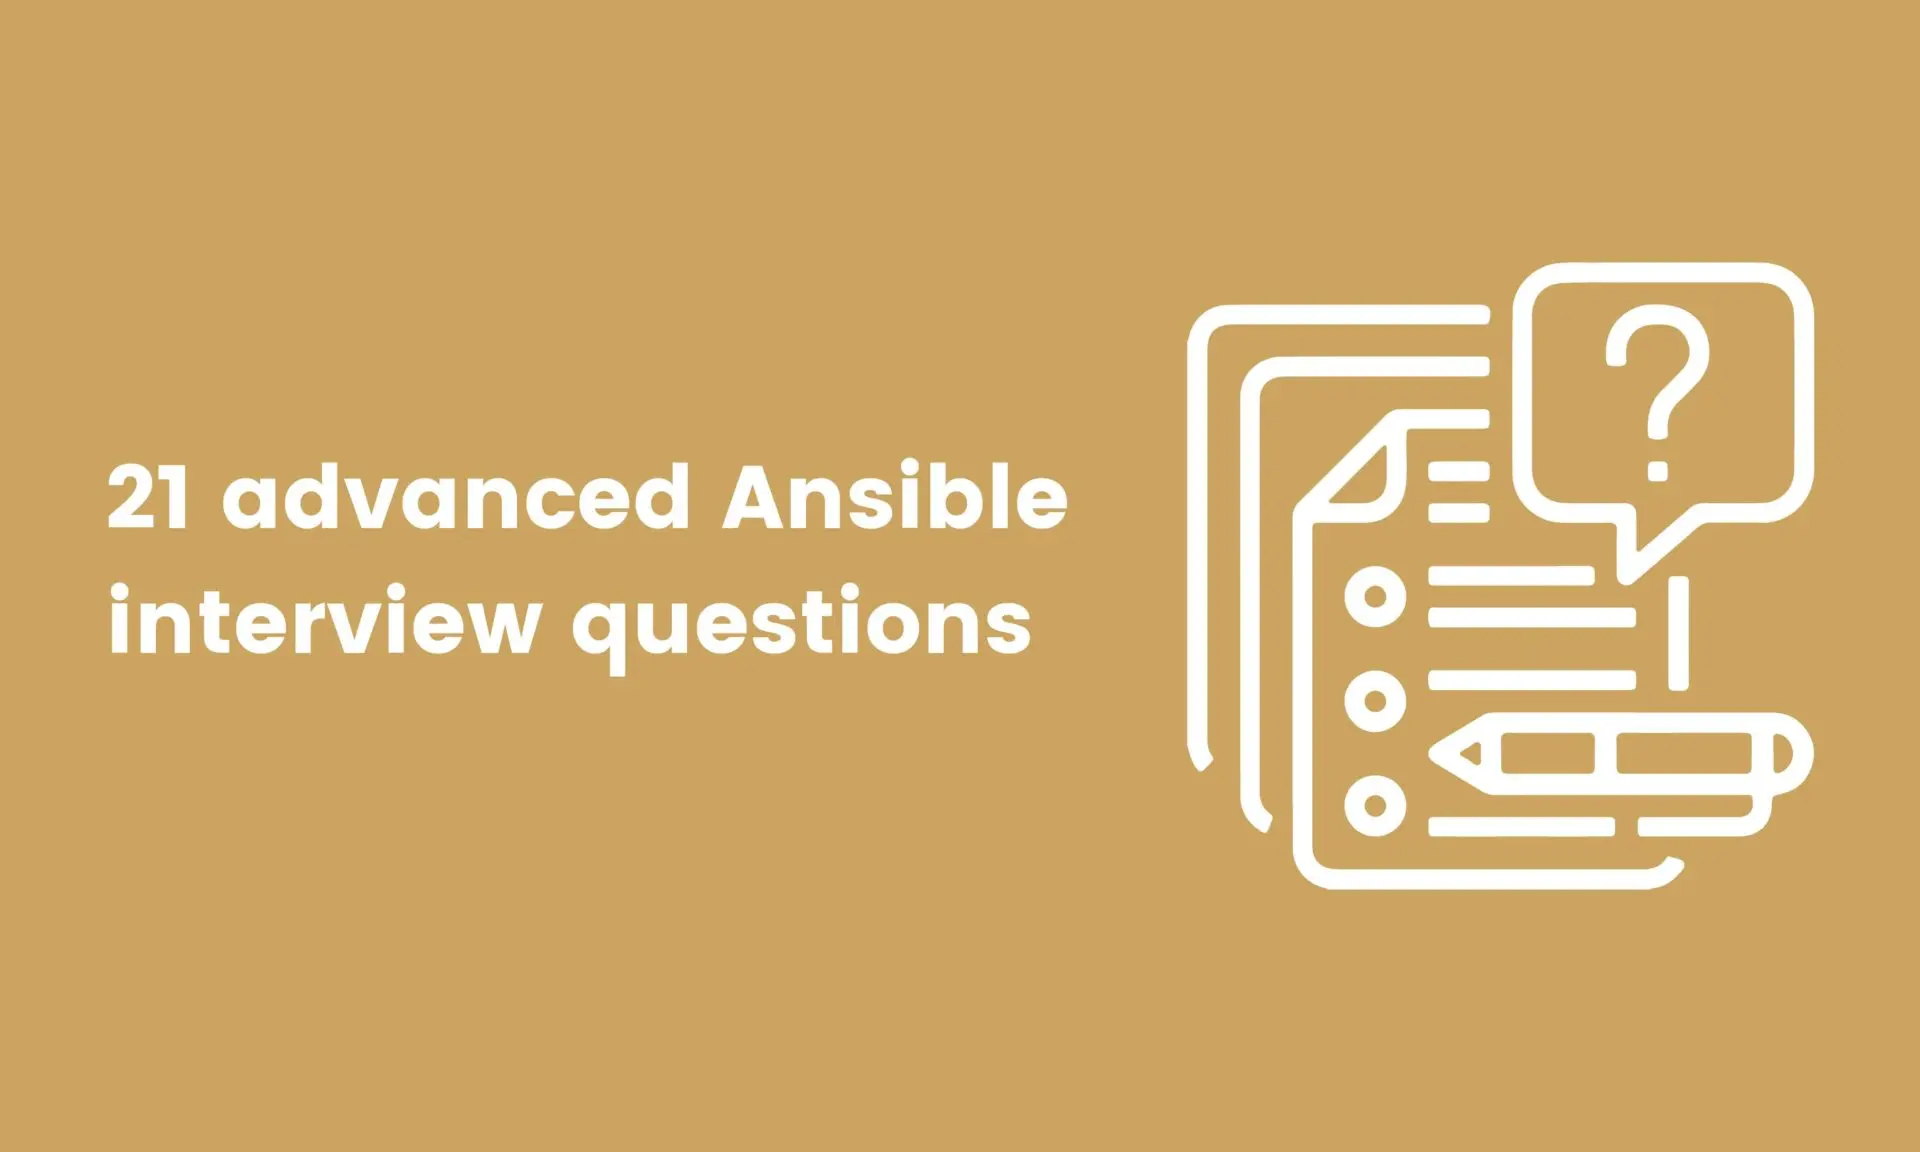 21 advanced Ansible interview questions